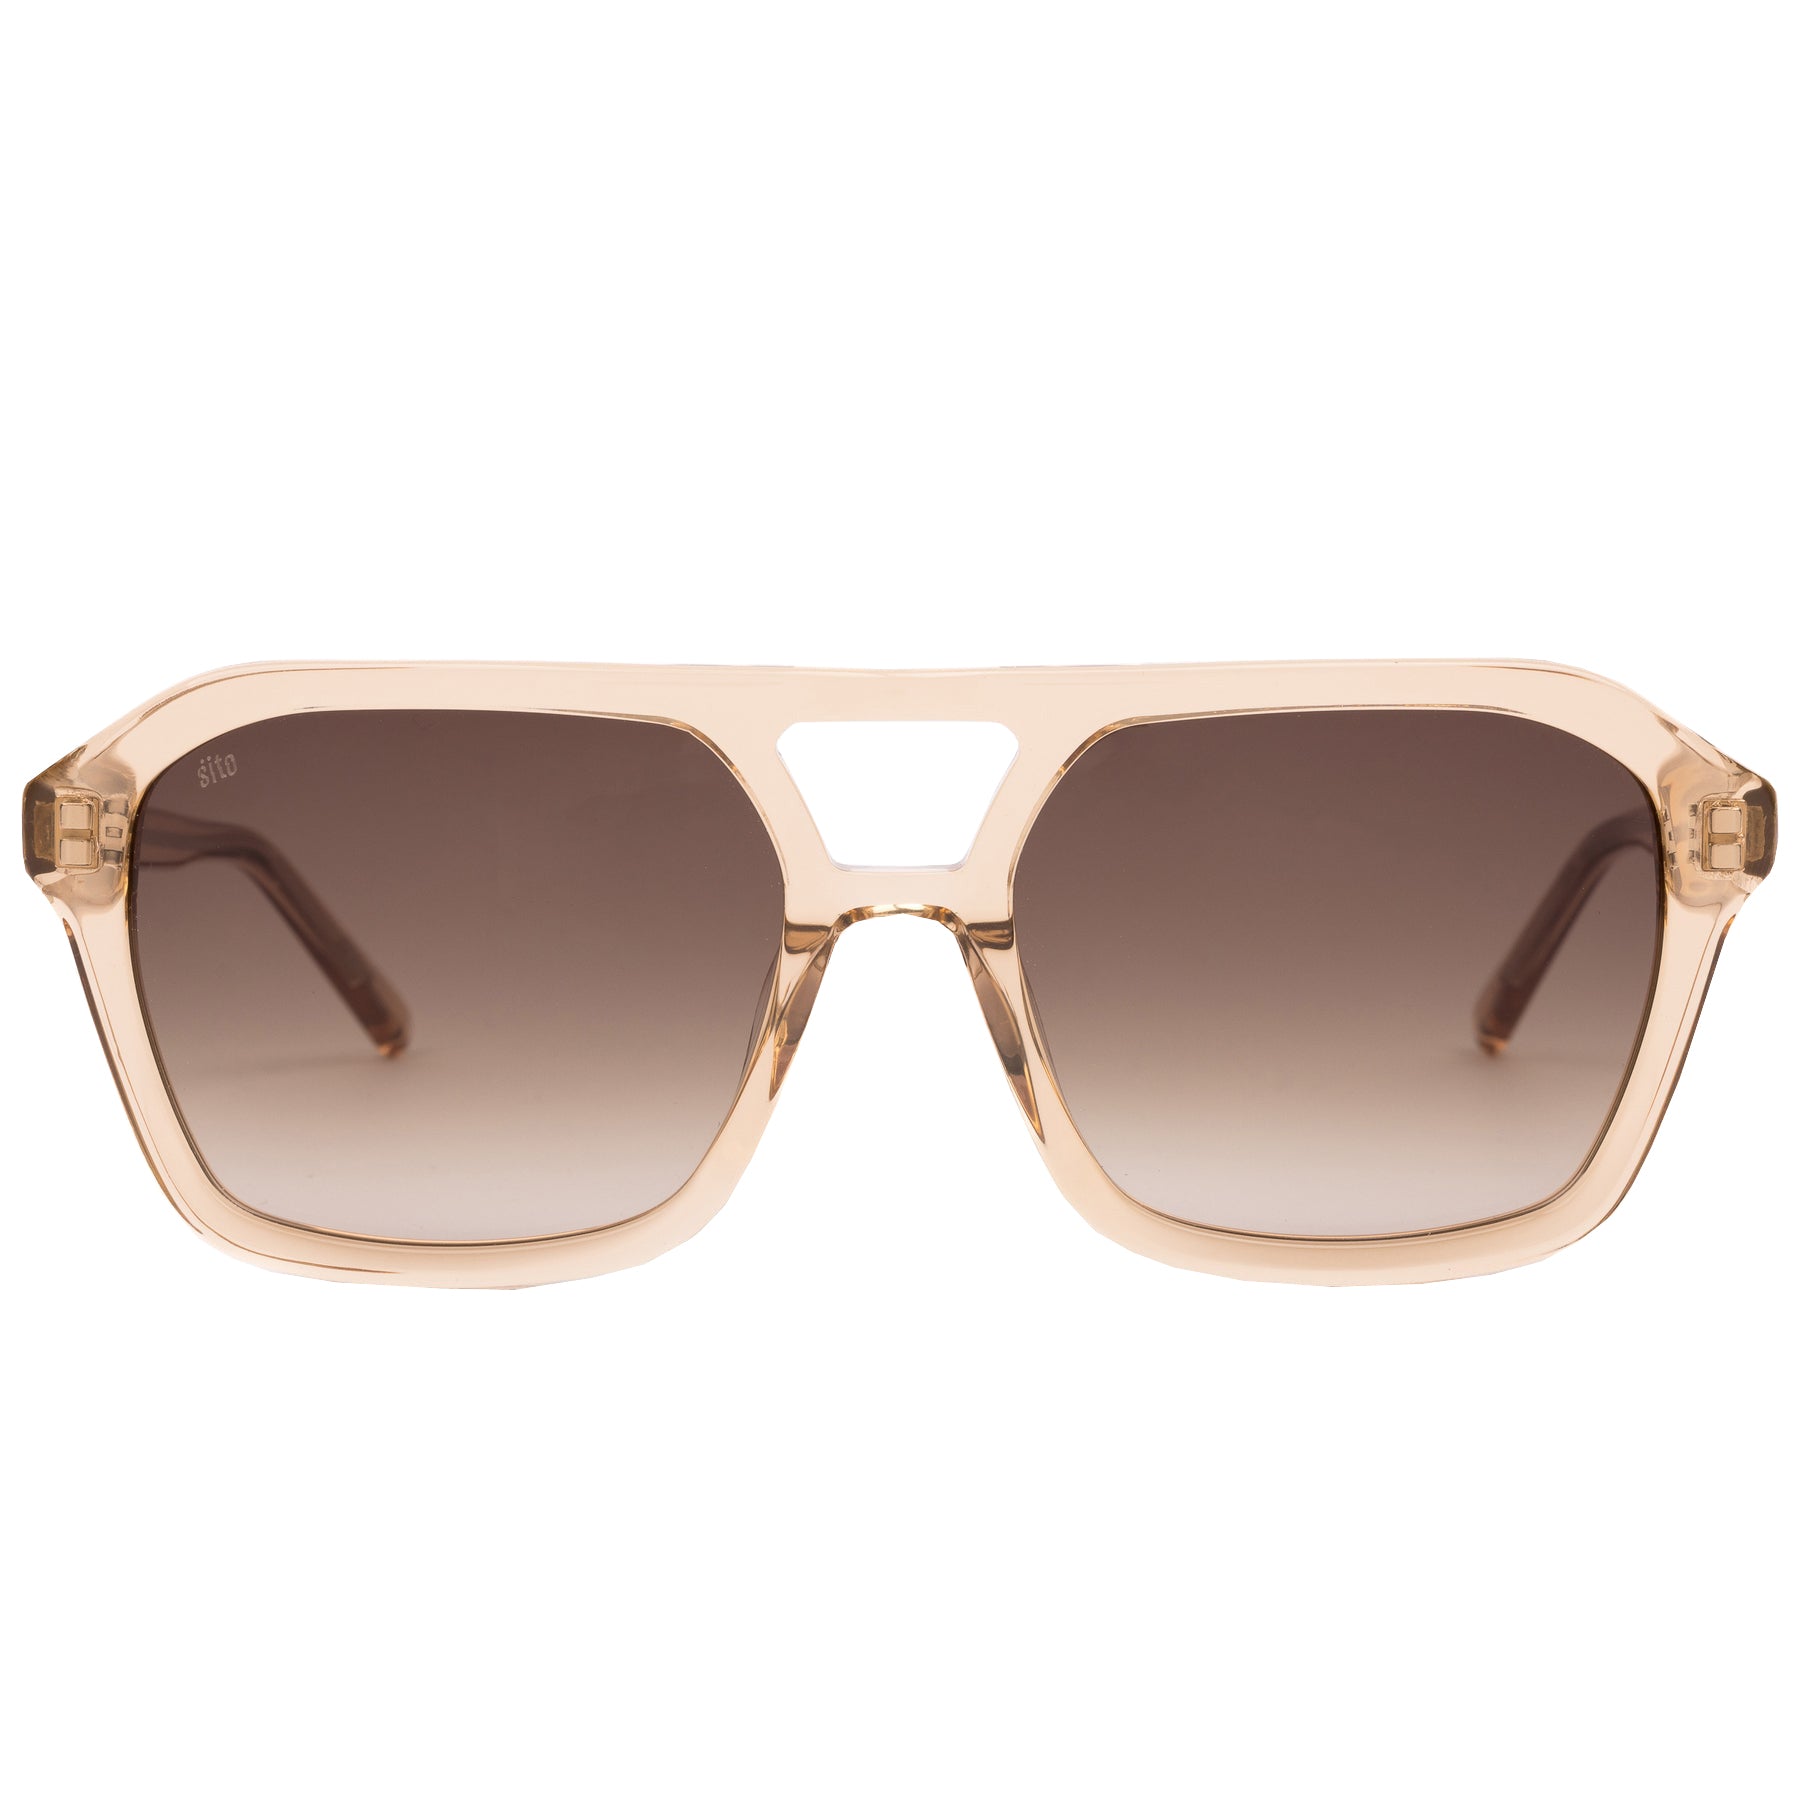 Sito The Void Sunglasses Sunlight BrownGradient